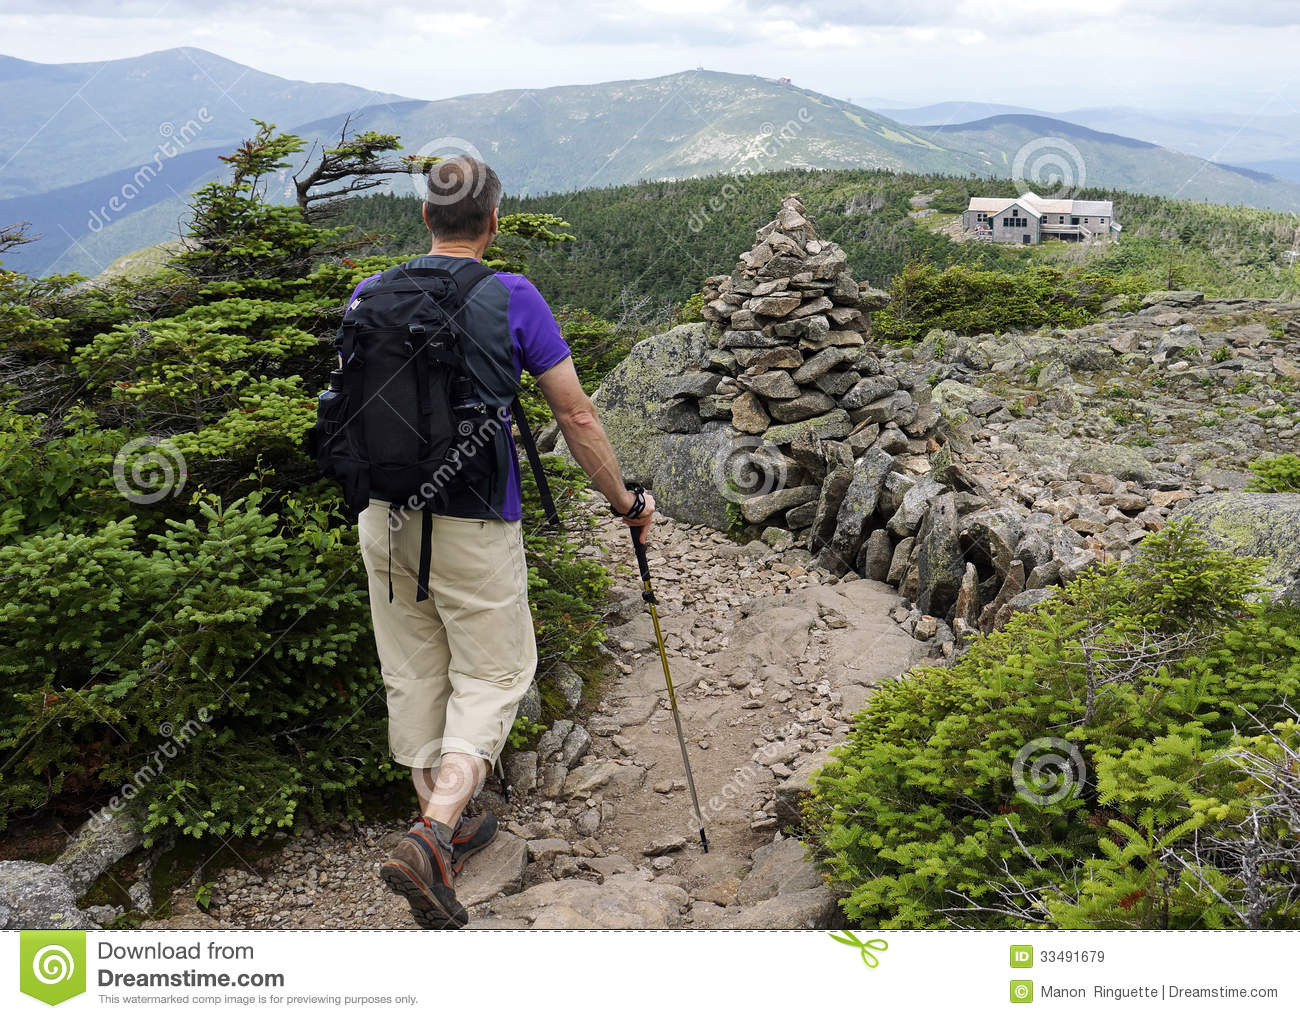 Hiking To Greenleaf Hut On Appalachian Trail Royalty Free Stock Images